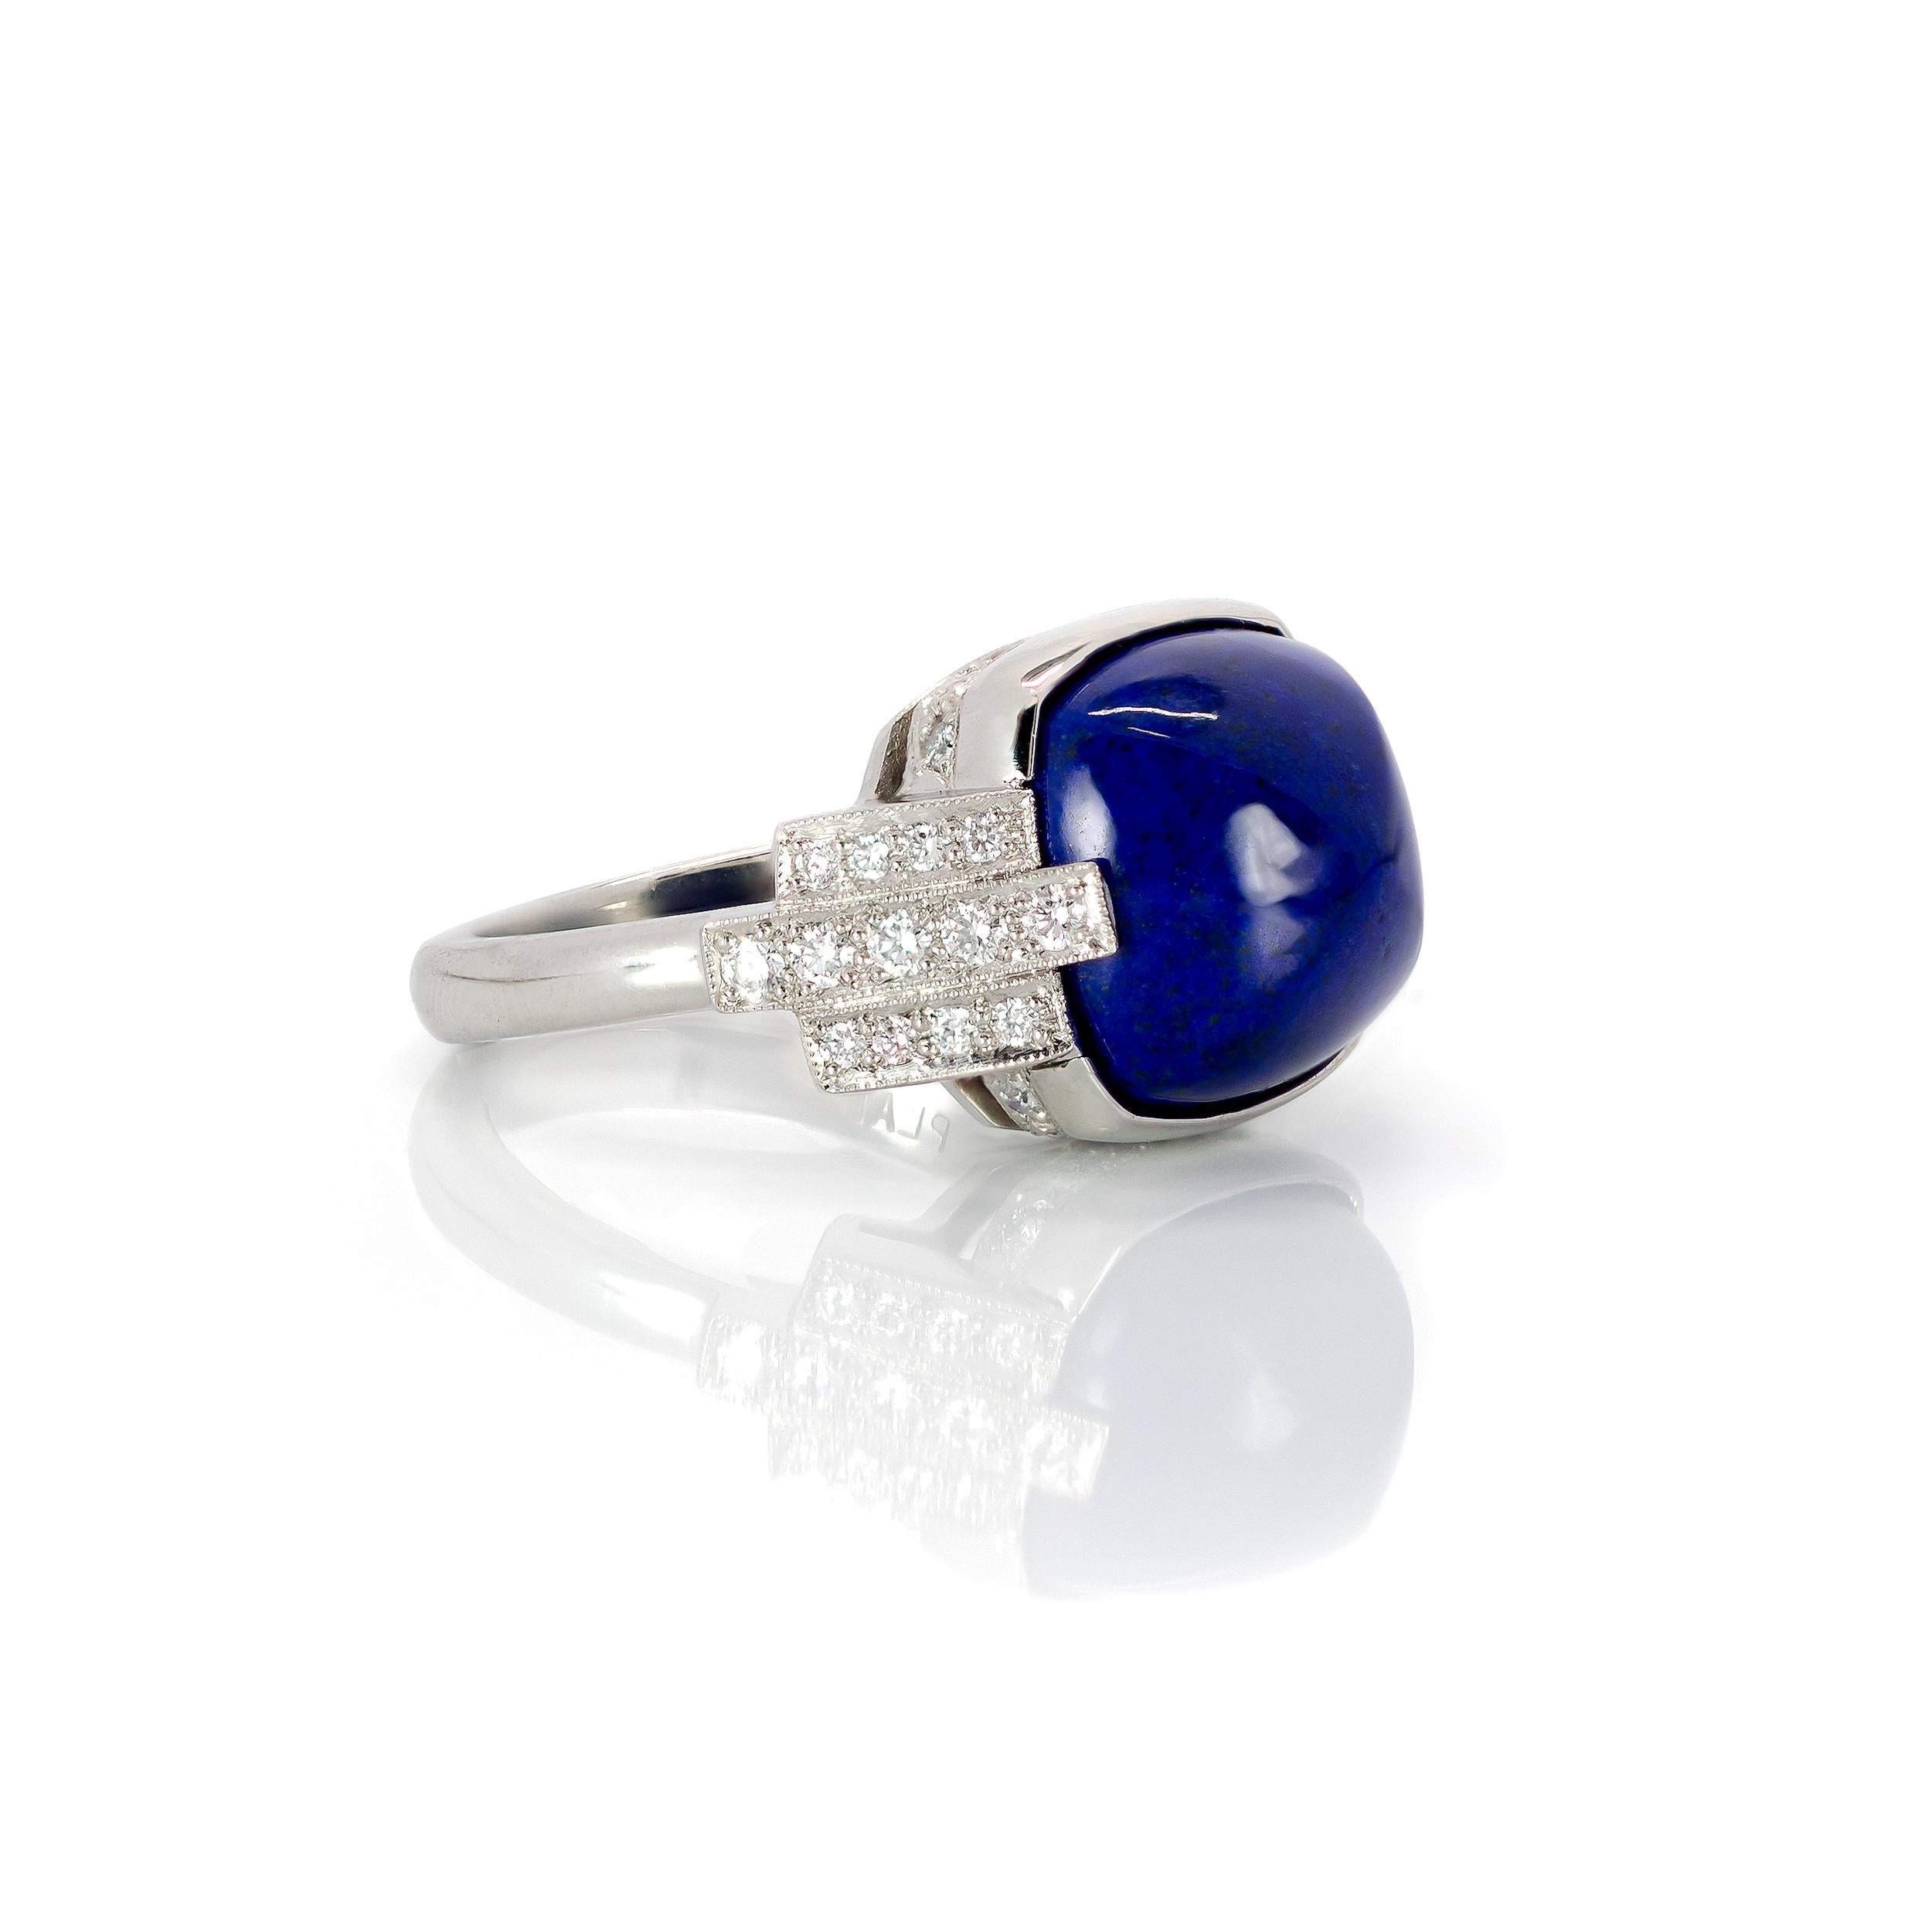 Lapis has been valued over the ages for its shade of blue.  While the ancient Egyptians prized Lapis in very small quantities, Italian craftsman elevated the material to new heights beginning in the 13th to 14th centuries and evolved the use of